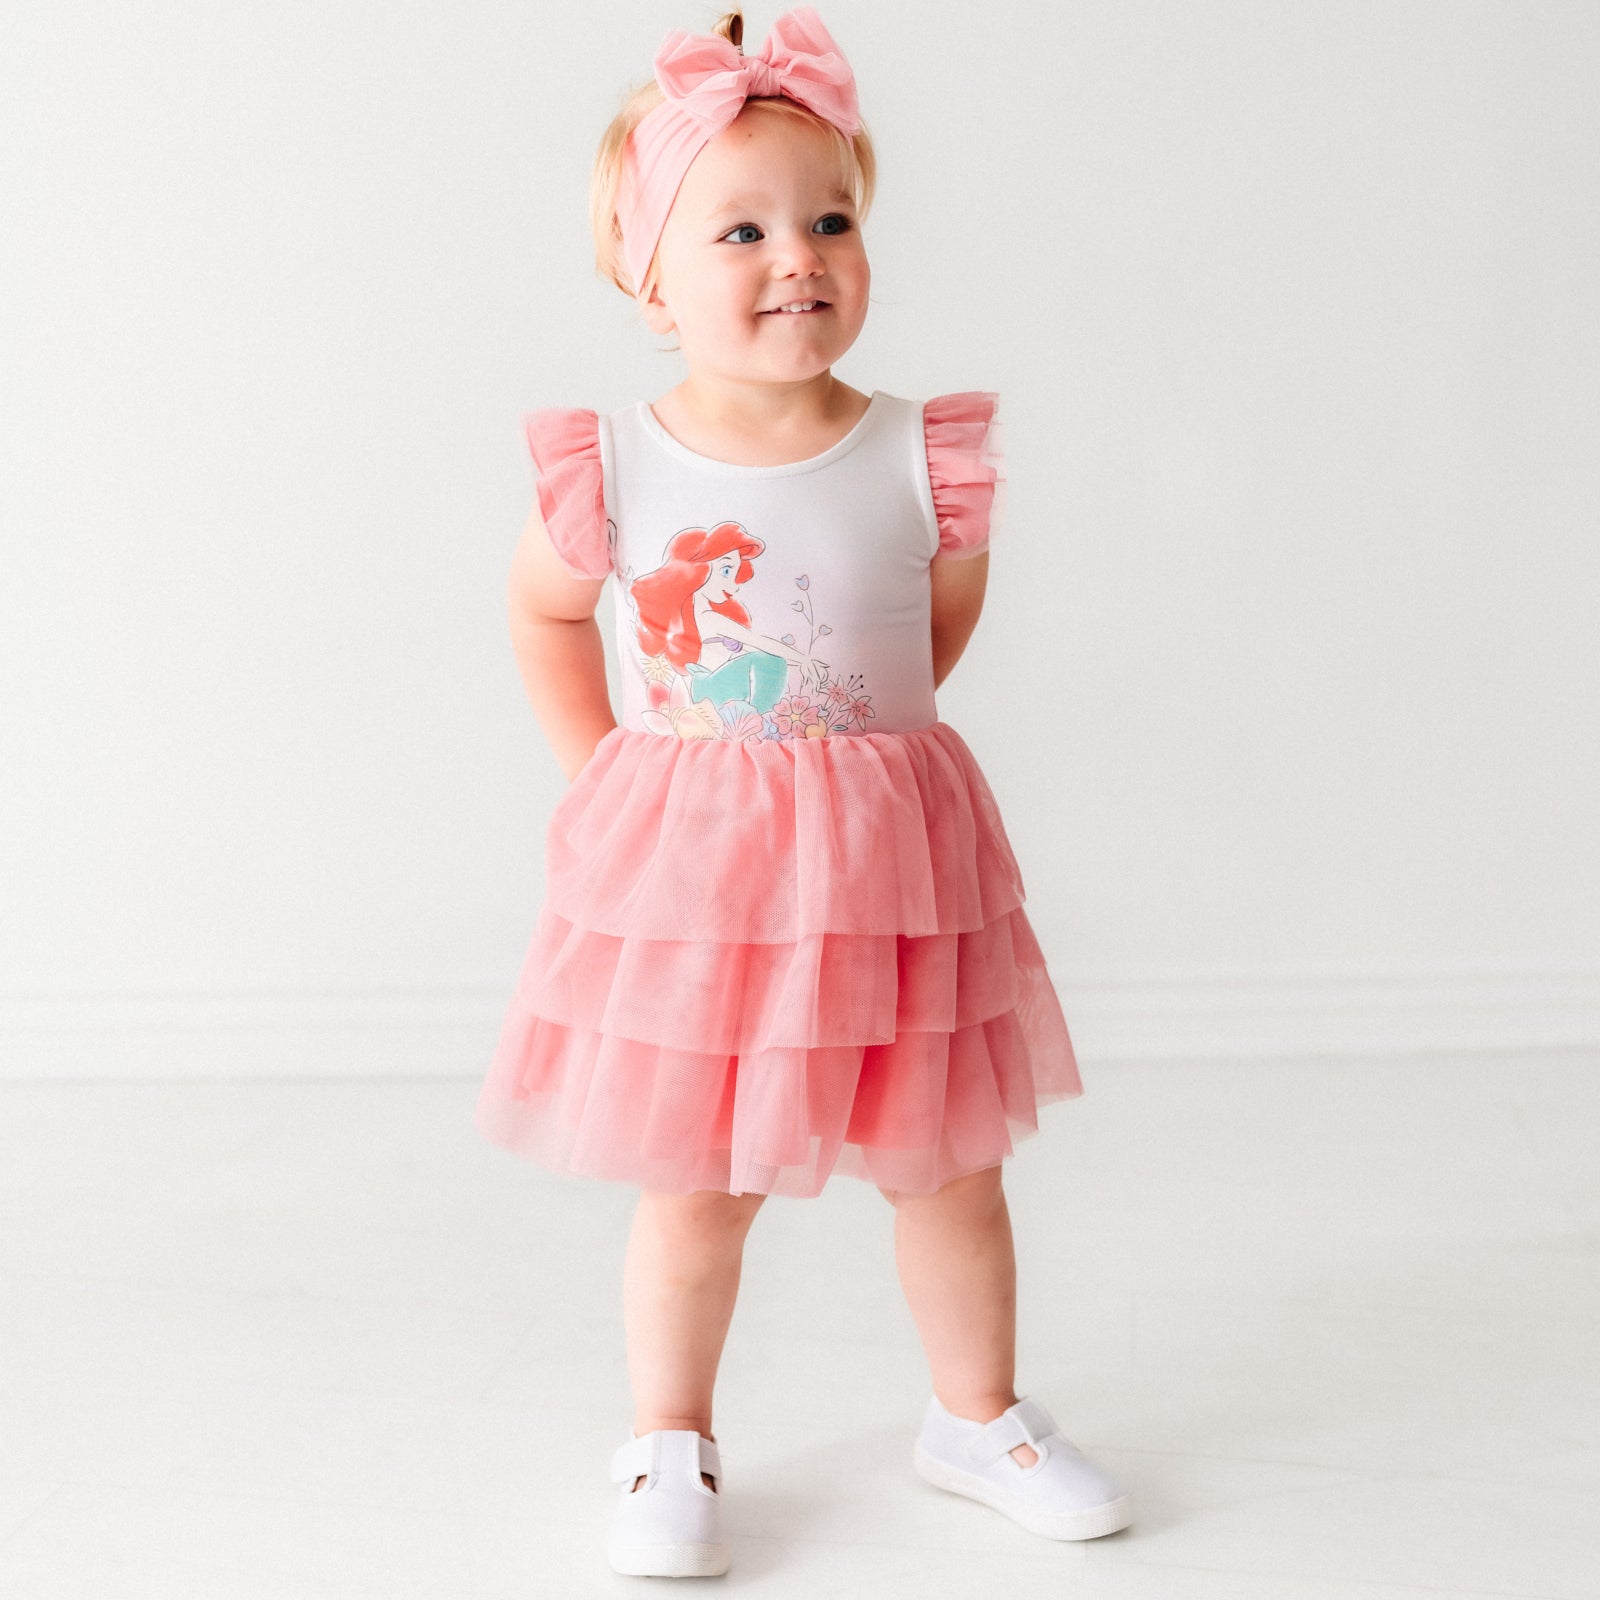 Child wearing an Ariel flutter tiered tutu dress with bloomer and matching tulle luxe bow headband